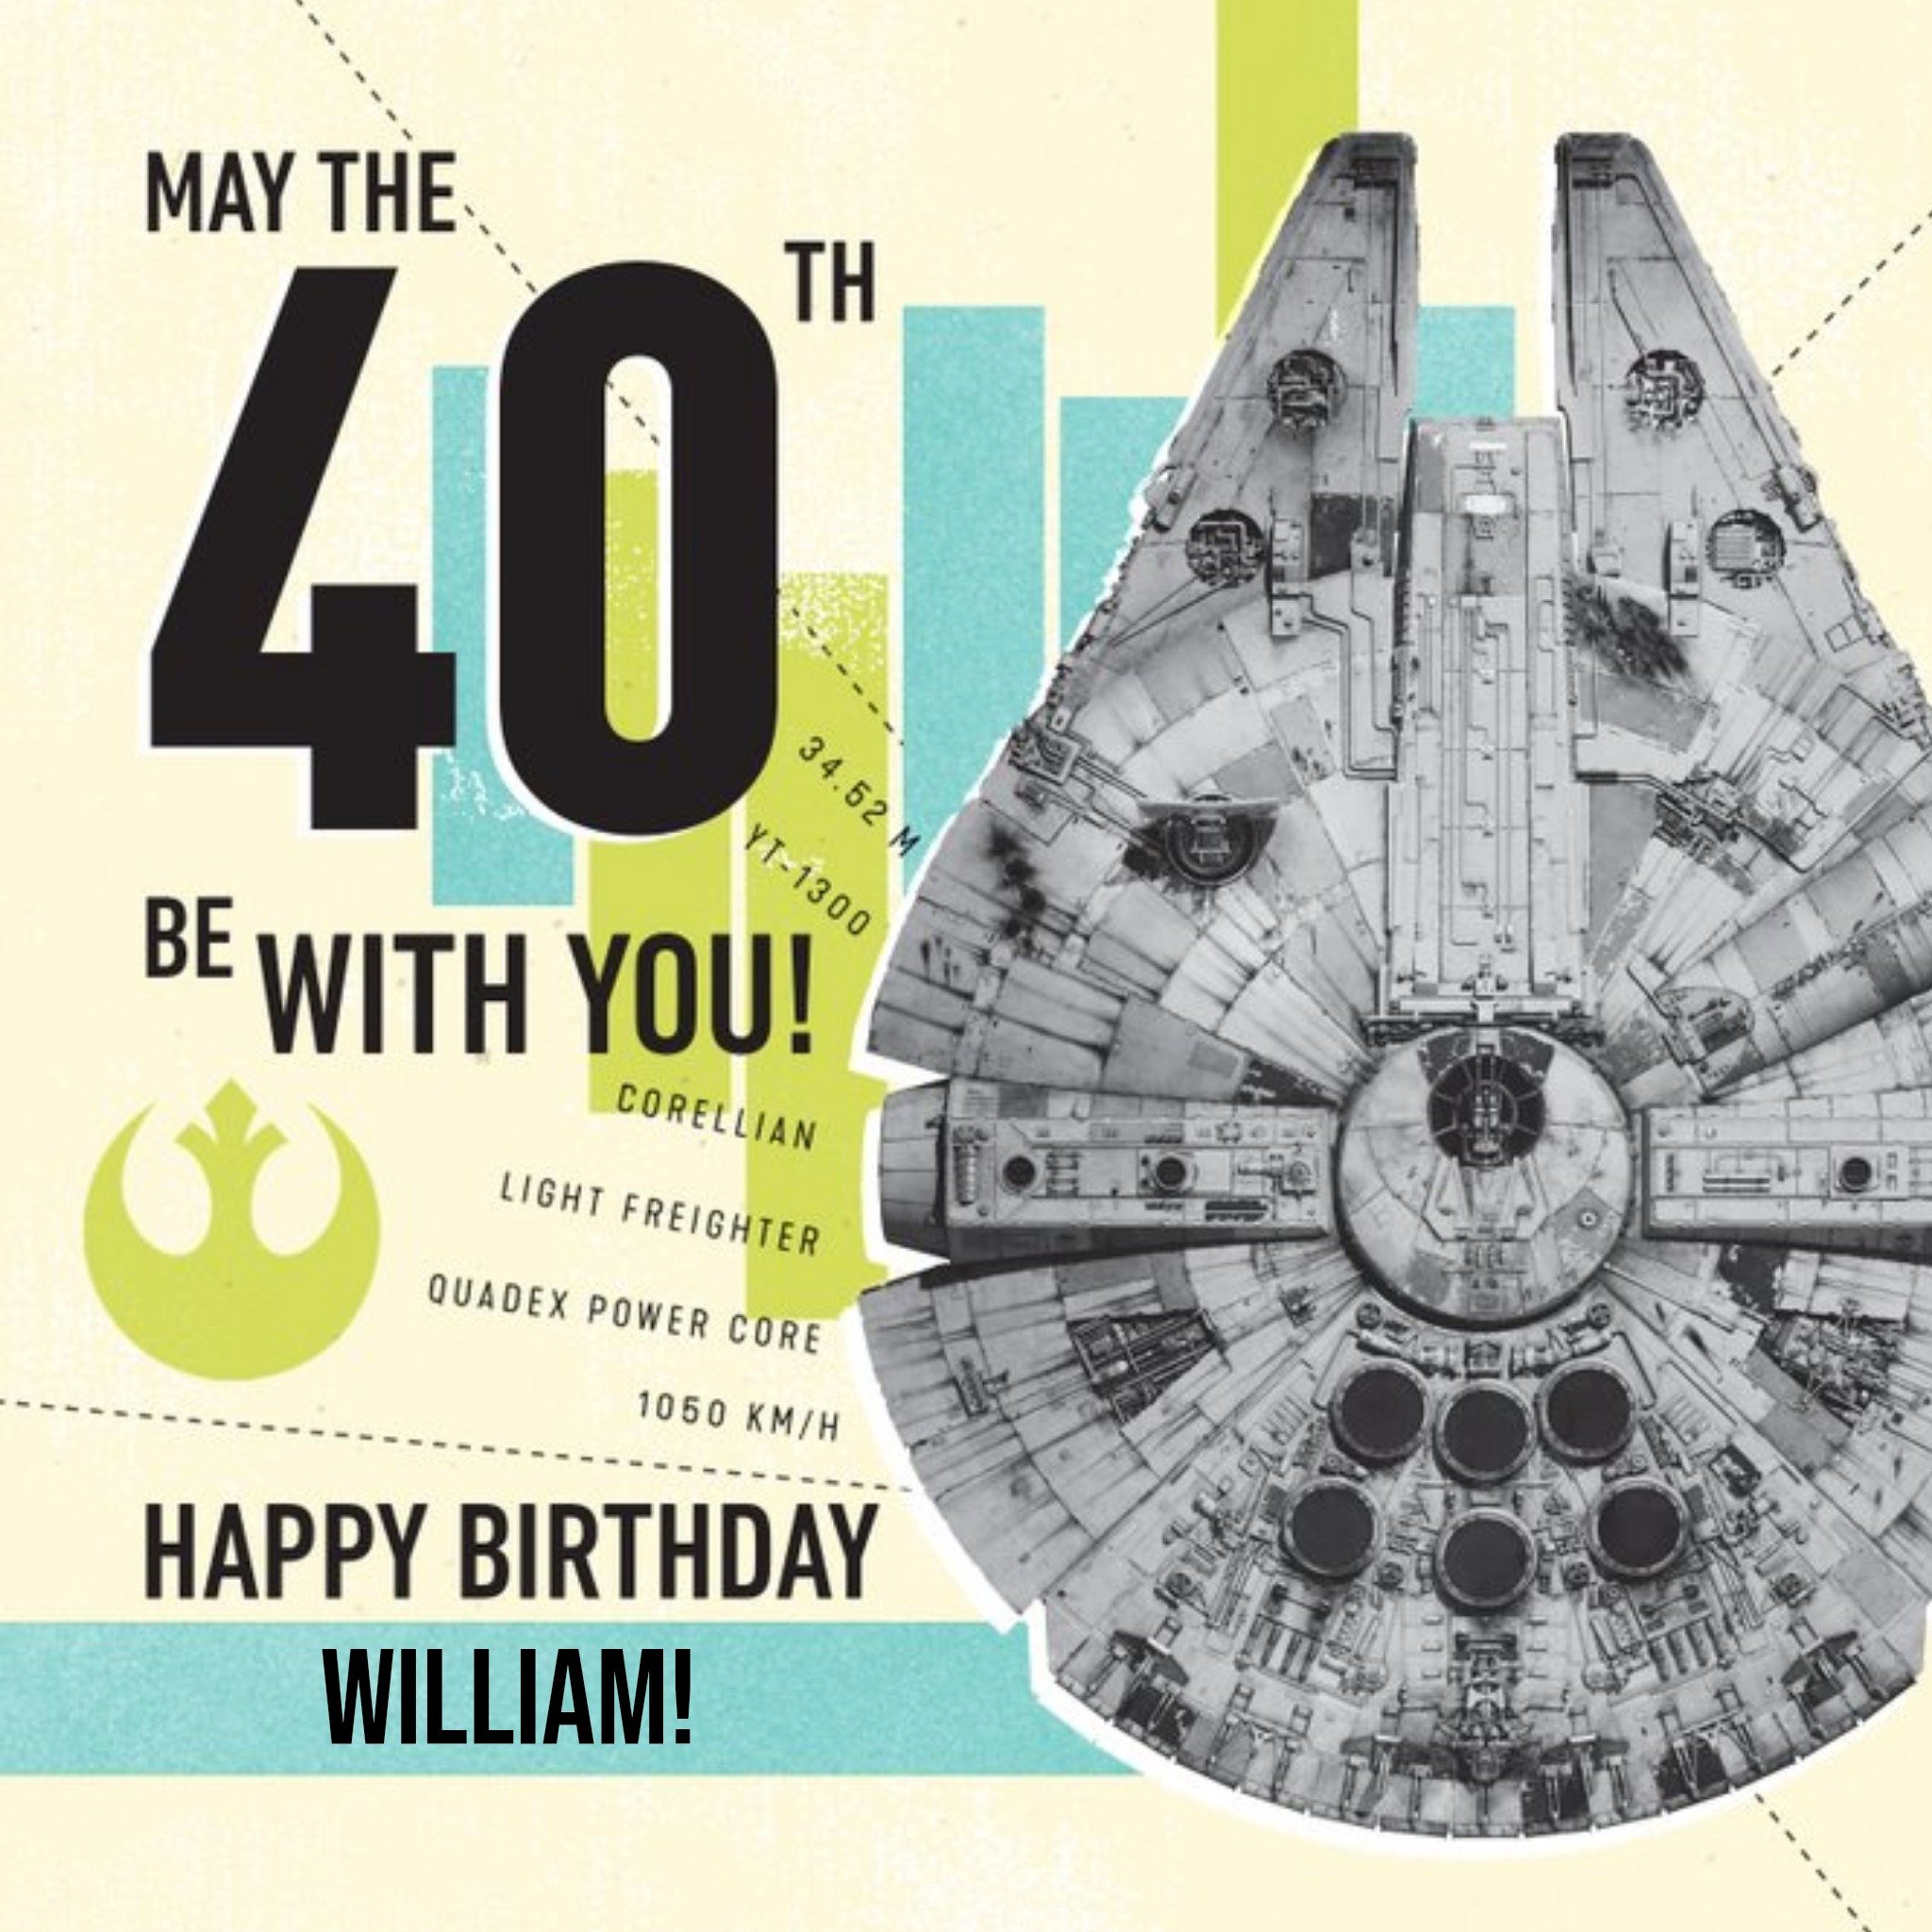 Disney Star Wars Millennium Falcon May the Force Be With You 40th Birthday Card, Square